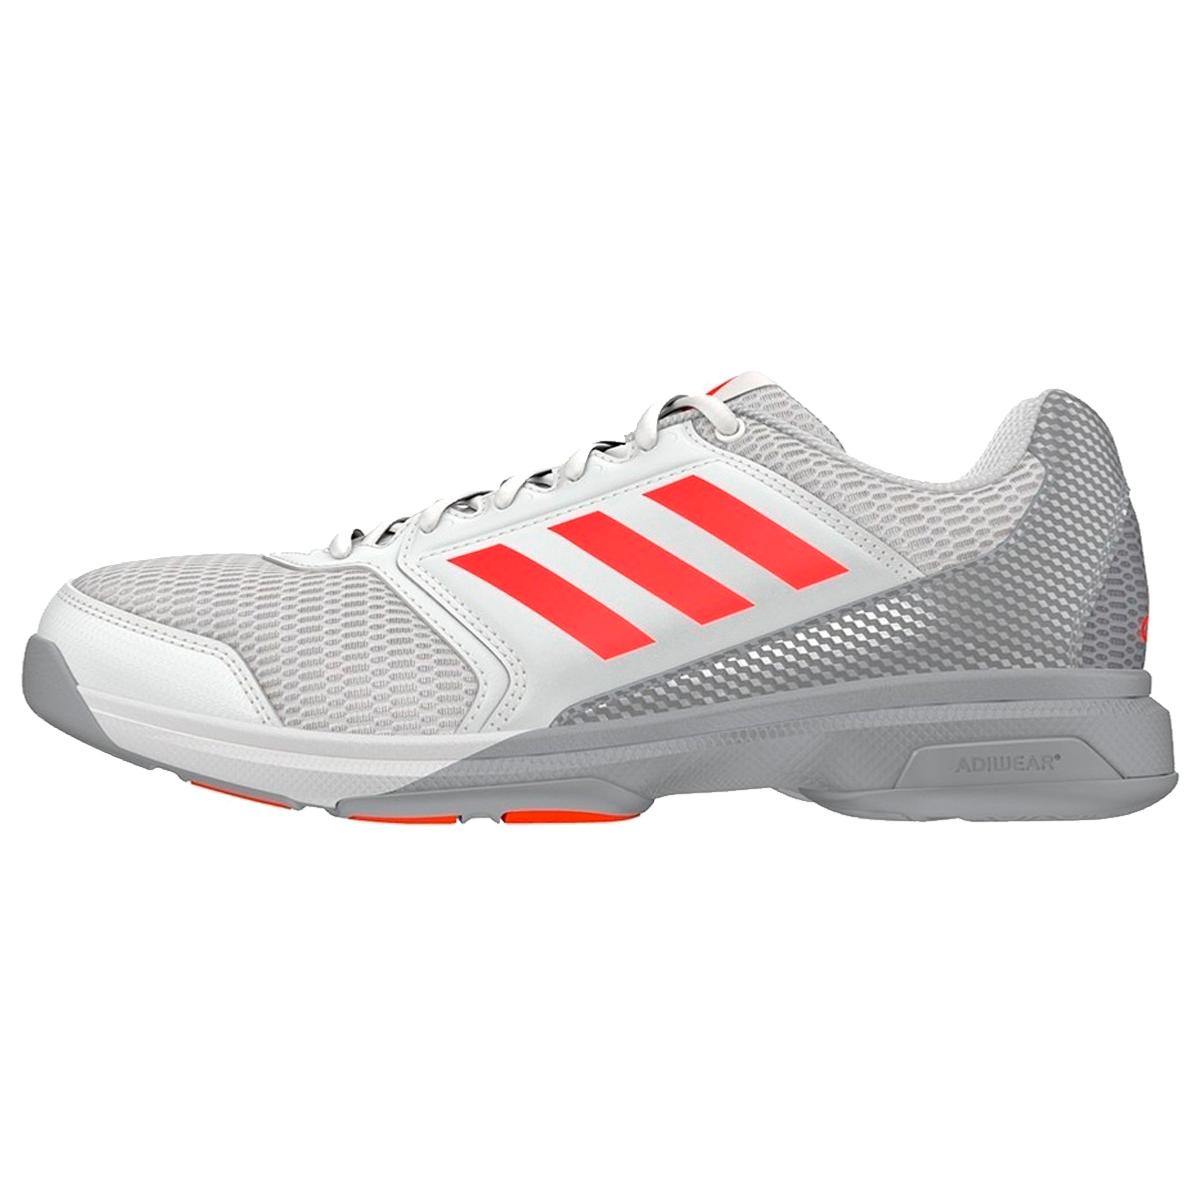 Buy Adidas Multido Essence Squash Shoes at a great price.